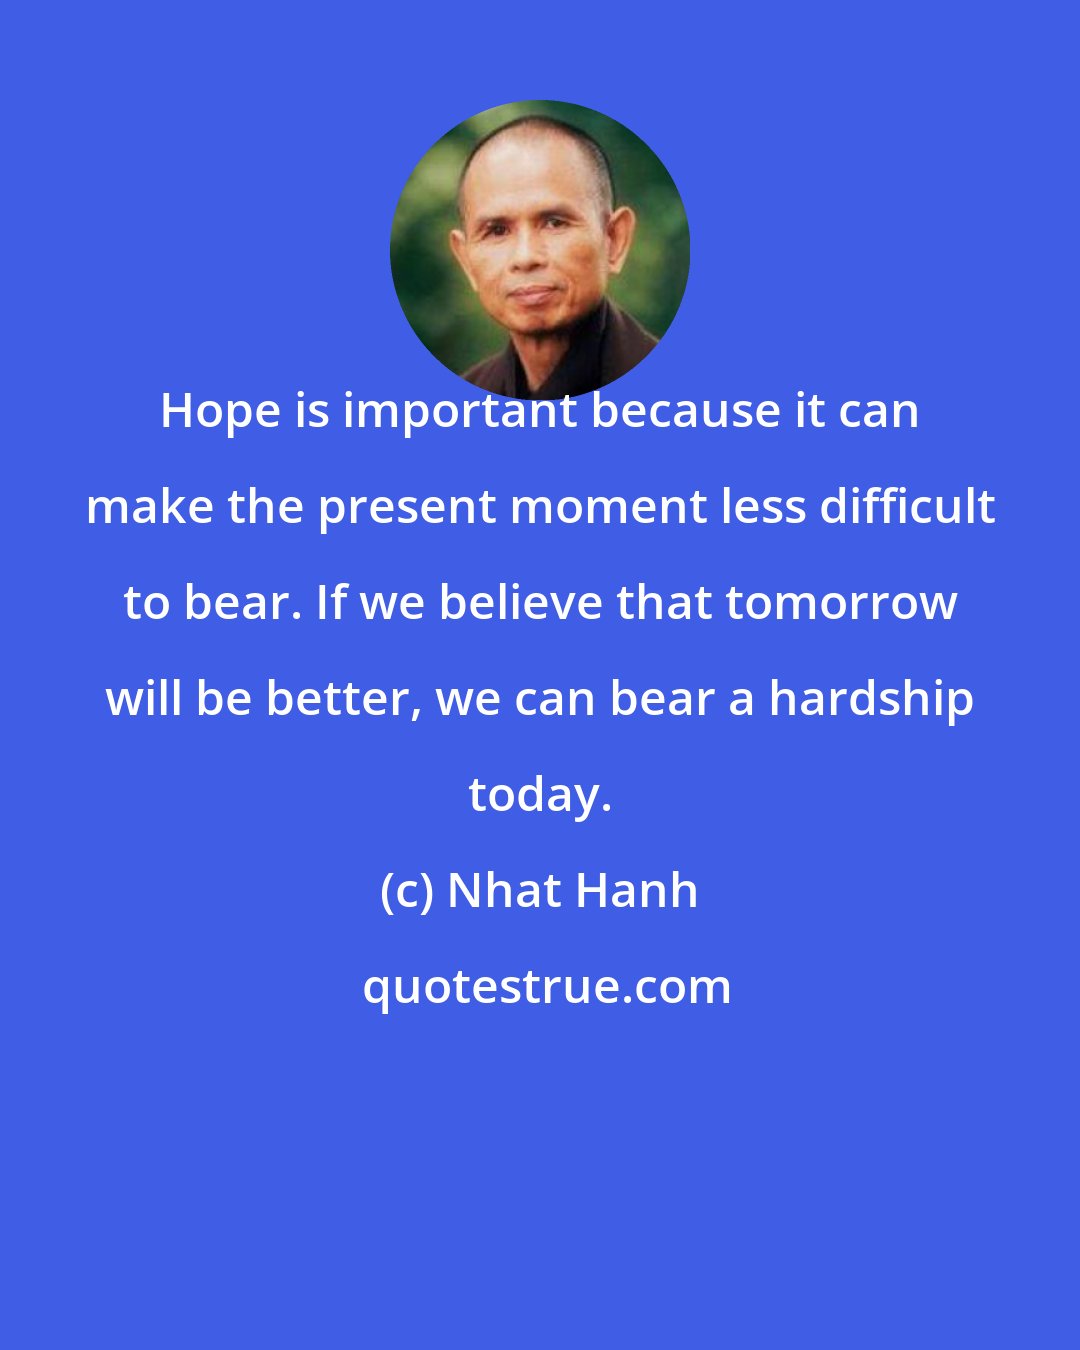 Nhat Hanh: Hope is important because it can make the present moment less difficult to bear. If we believe that tomorrow will be better, we can bear a hardship today.